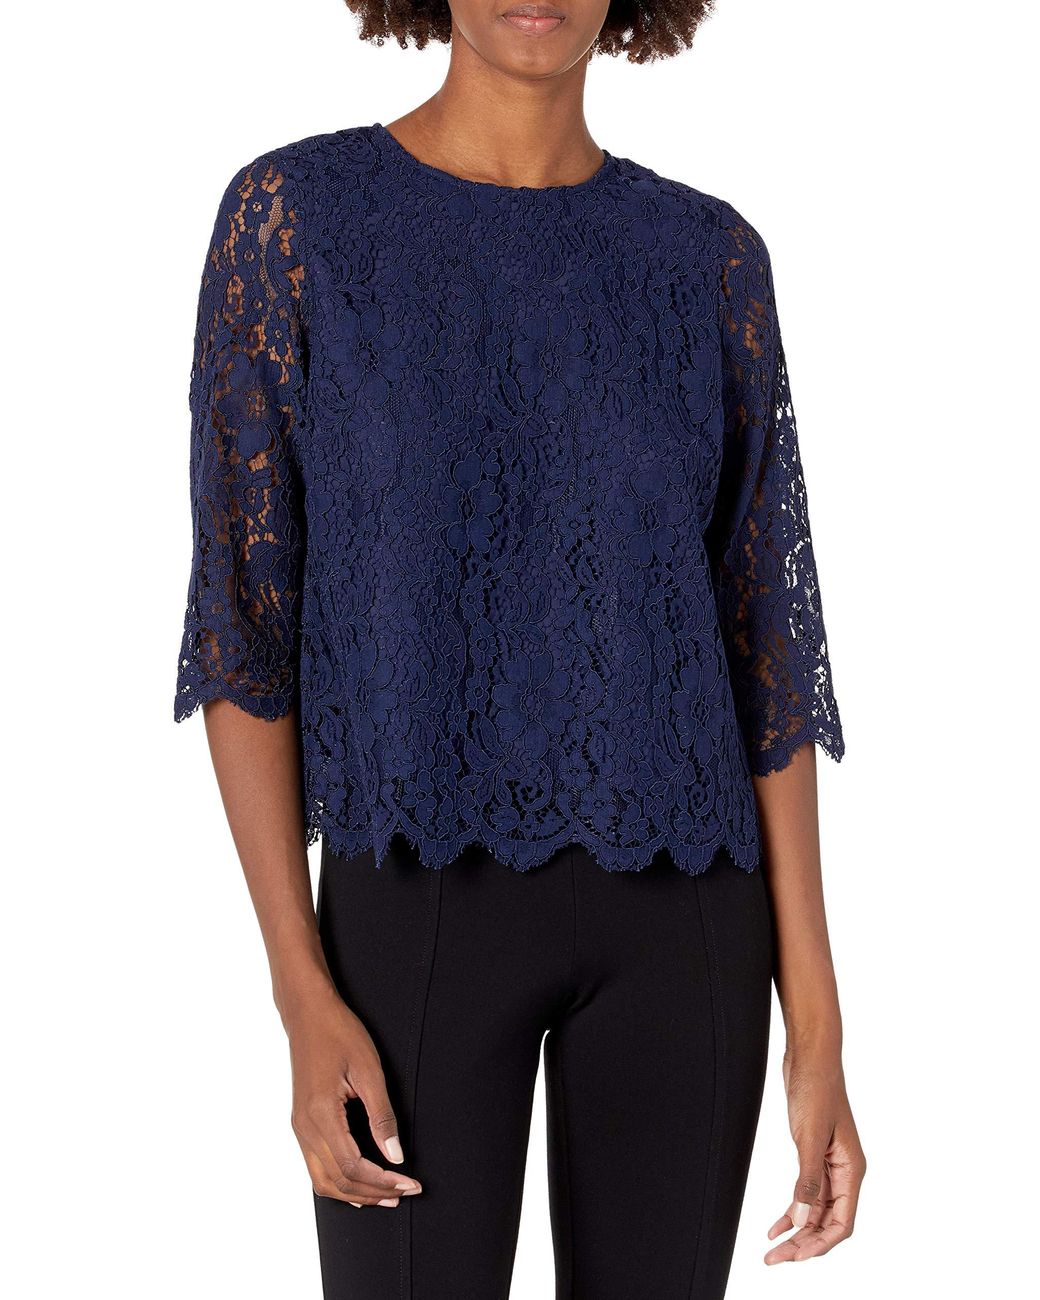 Tahari Lace 3/4 Sleeve Top in Navy Lace (Blue) - Save 48% - Lyst